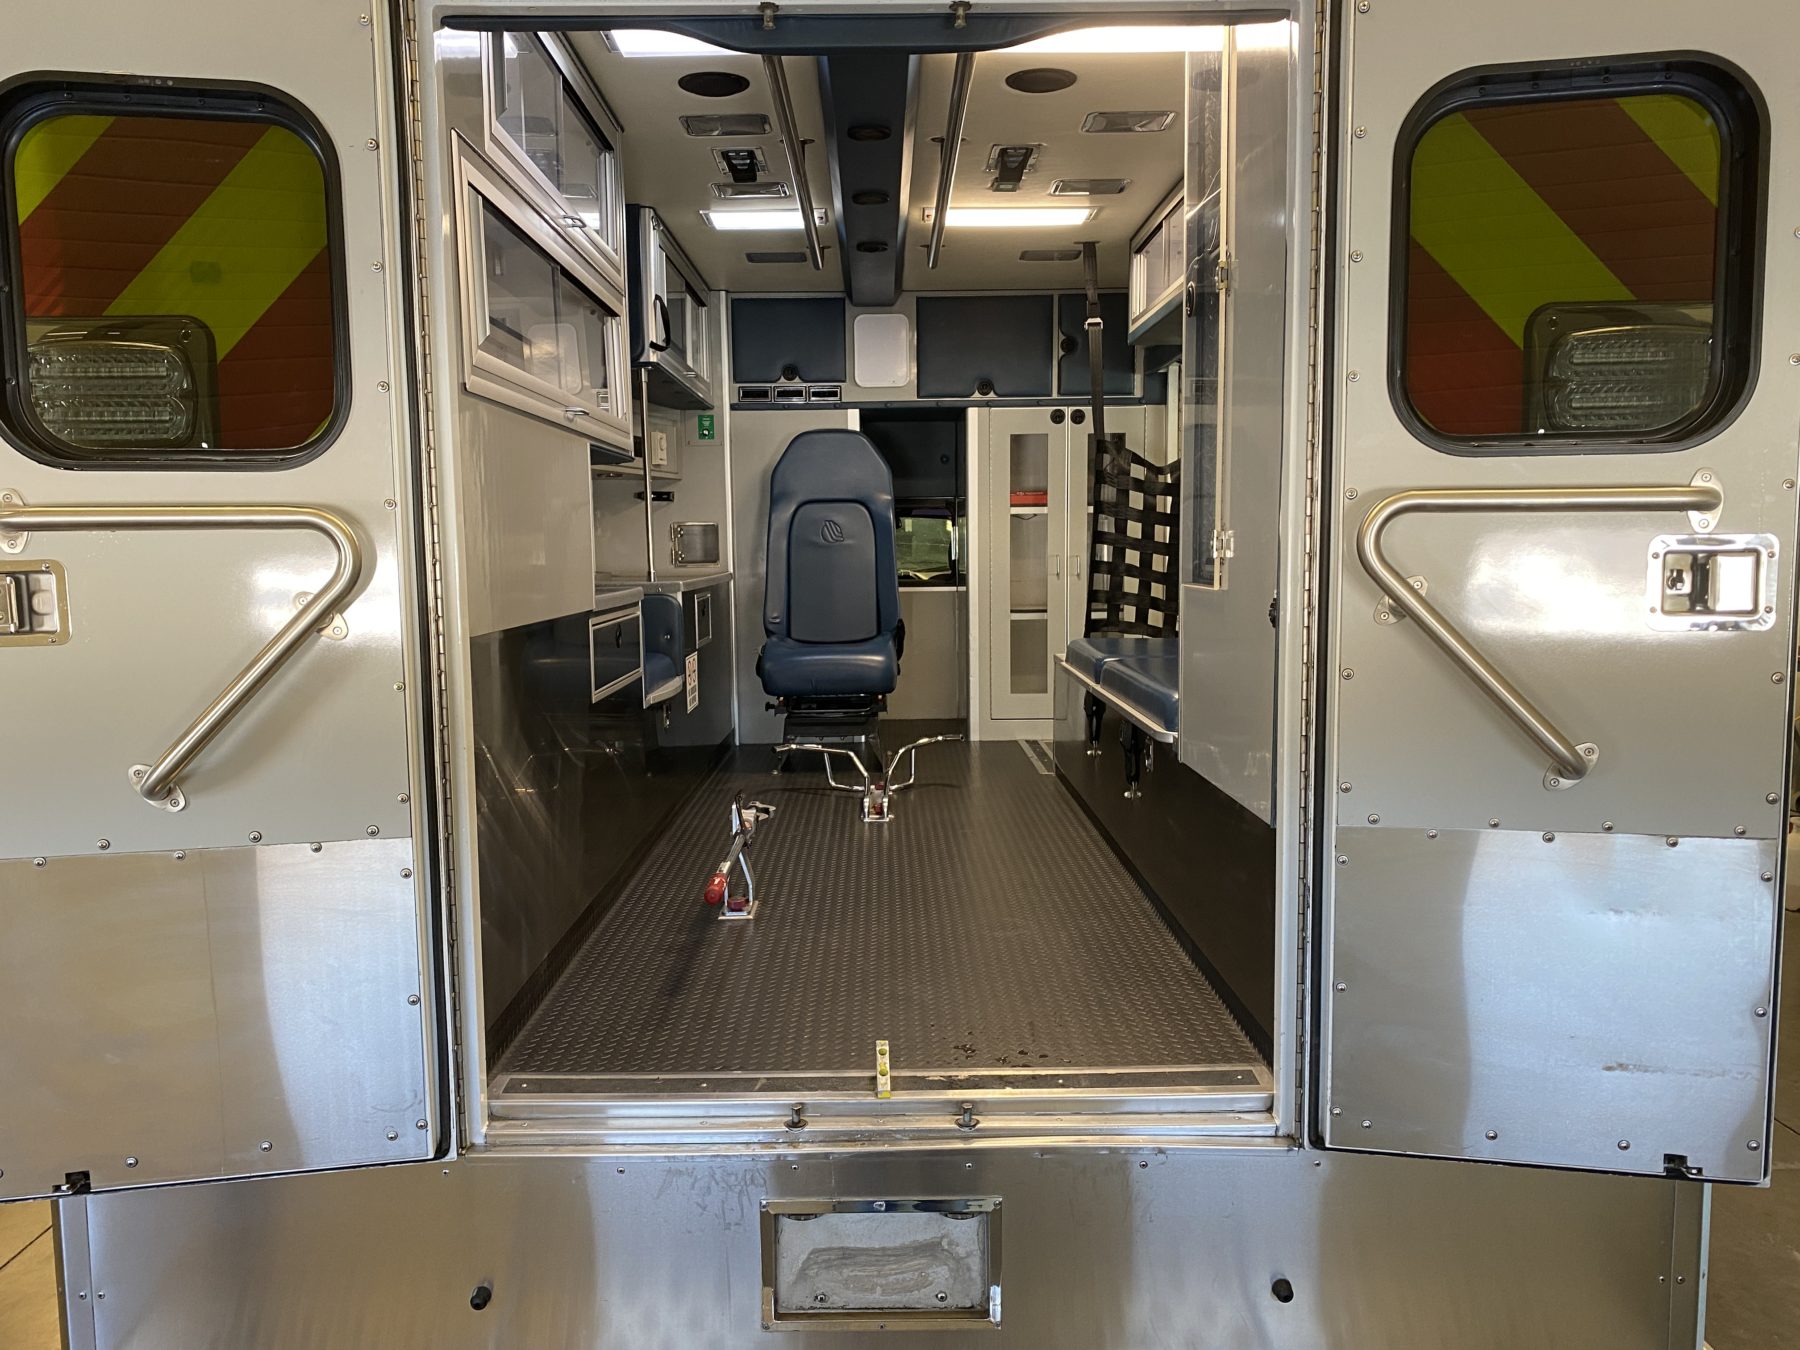 2019 Ford F450 4x4 Heavy Duty Ambulance For Sale – Picture 9